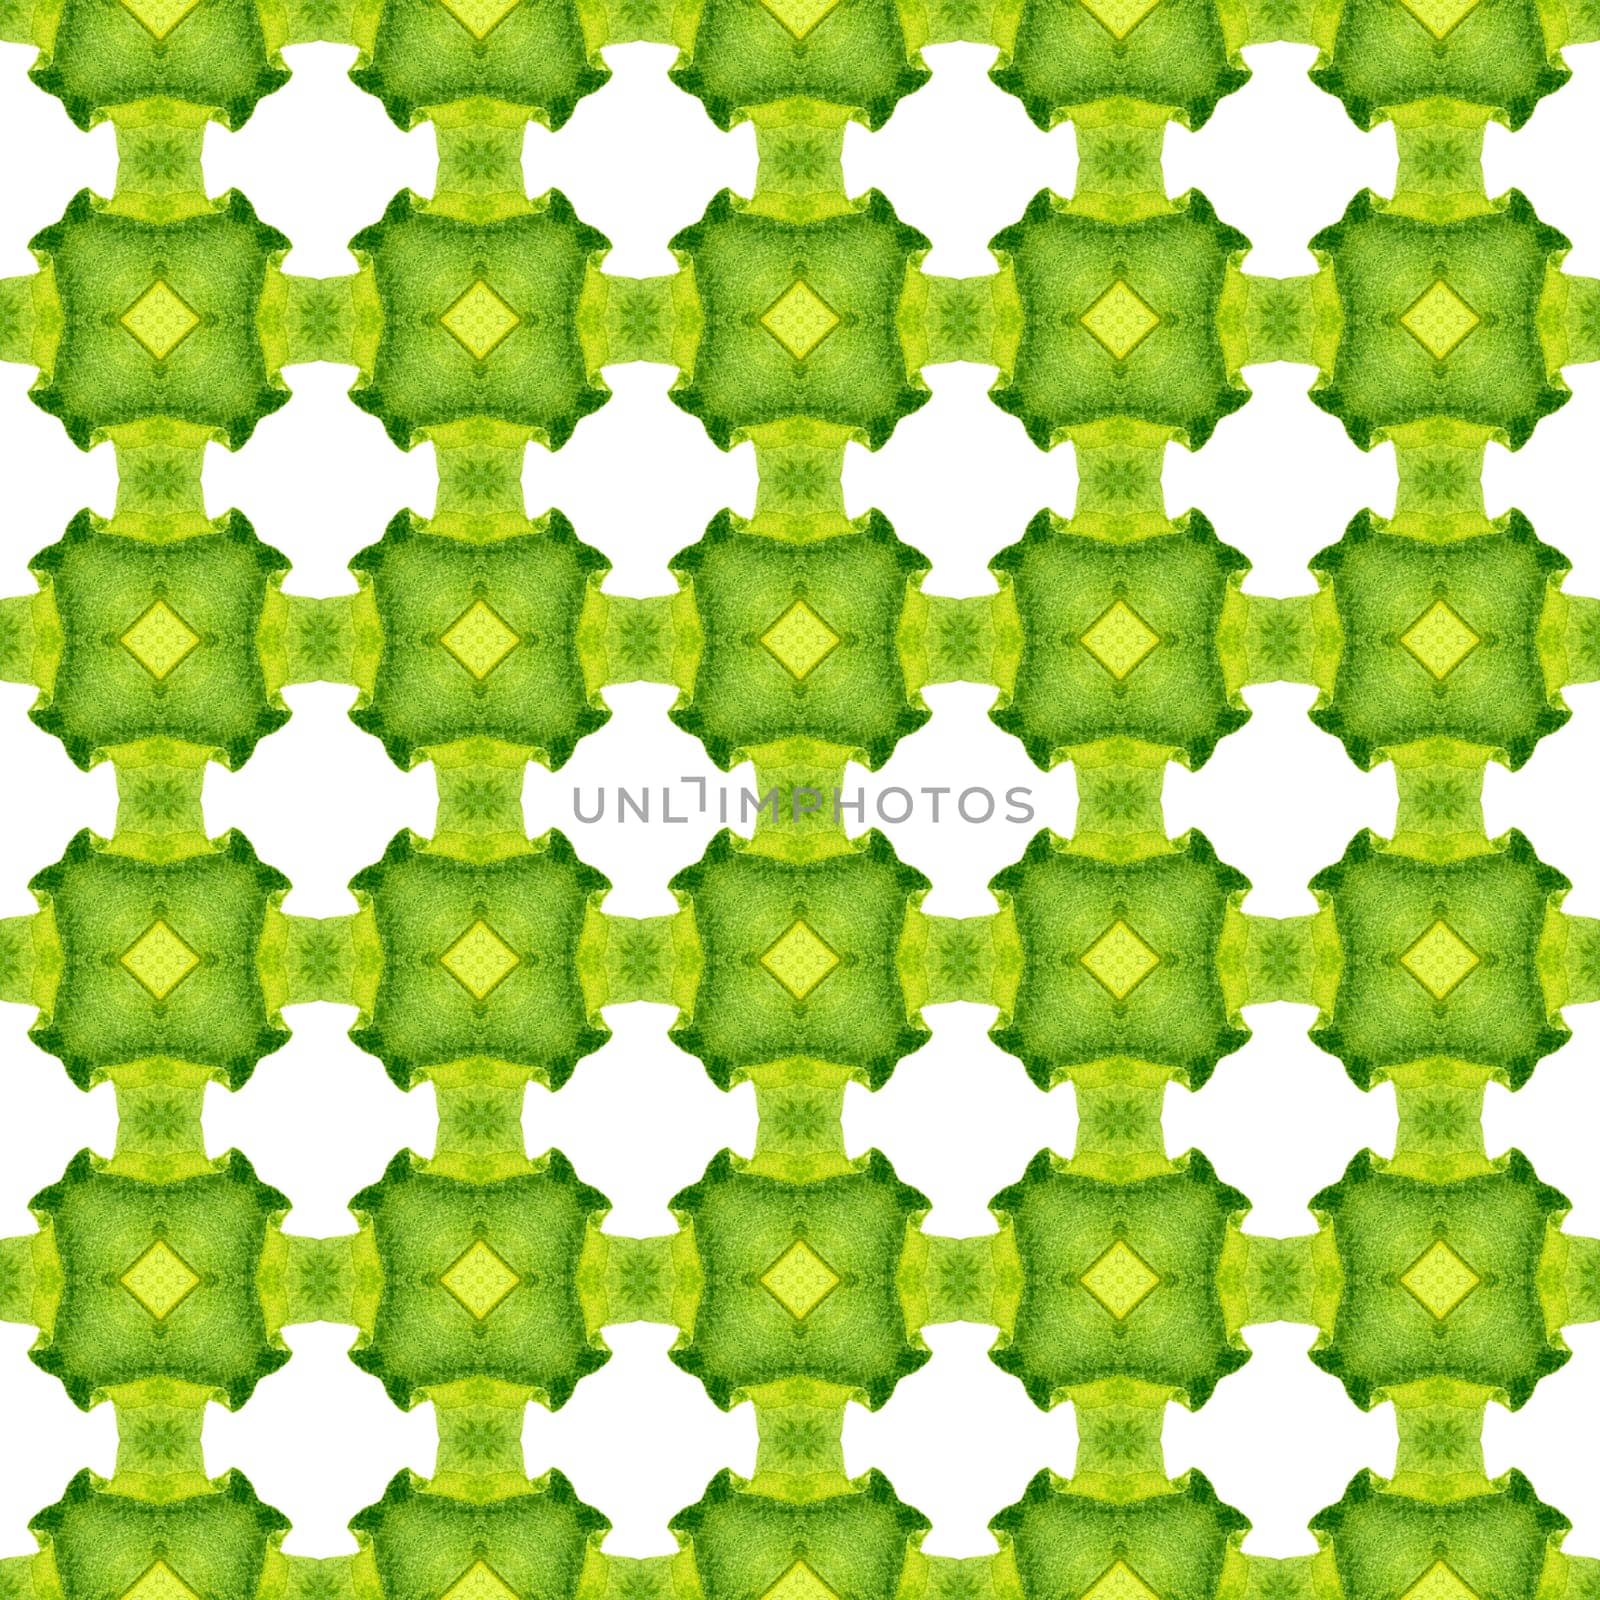 Watercolor ikat repeating tile border. Green amusing boho chic summer design. Textile ready sightly print, swimwear fabric, wallpaper, wrapping. Ikat repeating swimwear design.